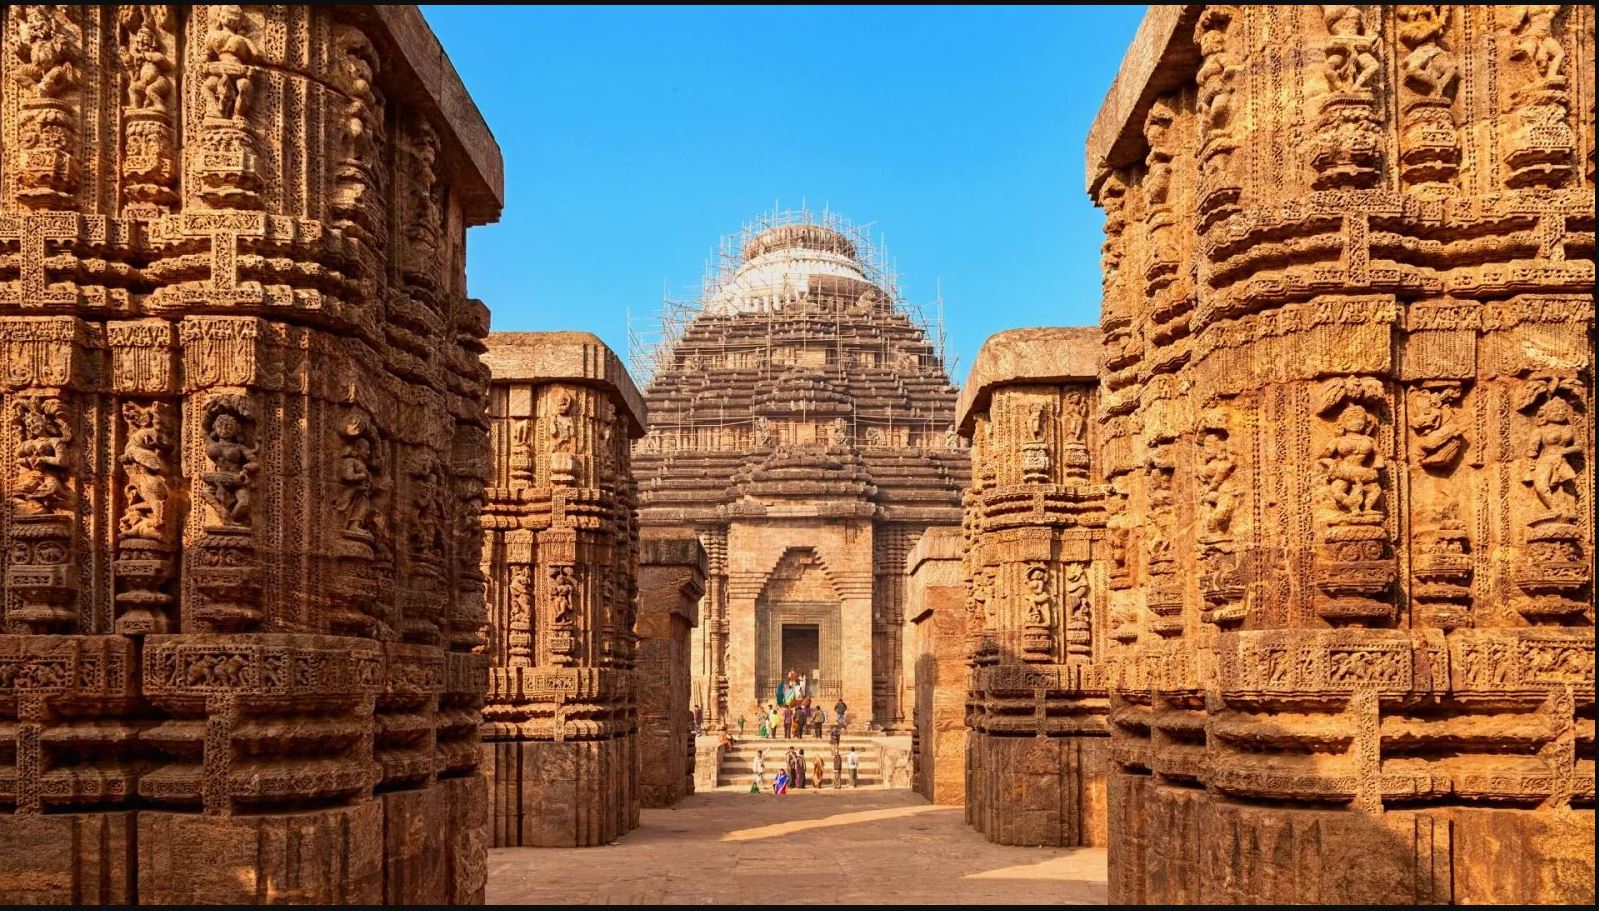 From today onwards the visiting hours of Konark Sun Temple have changed